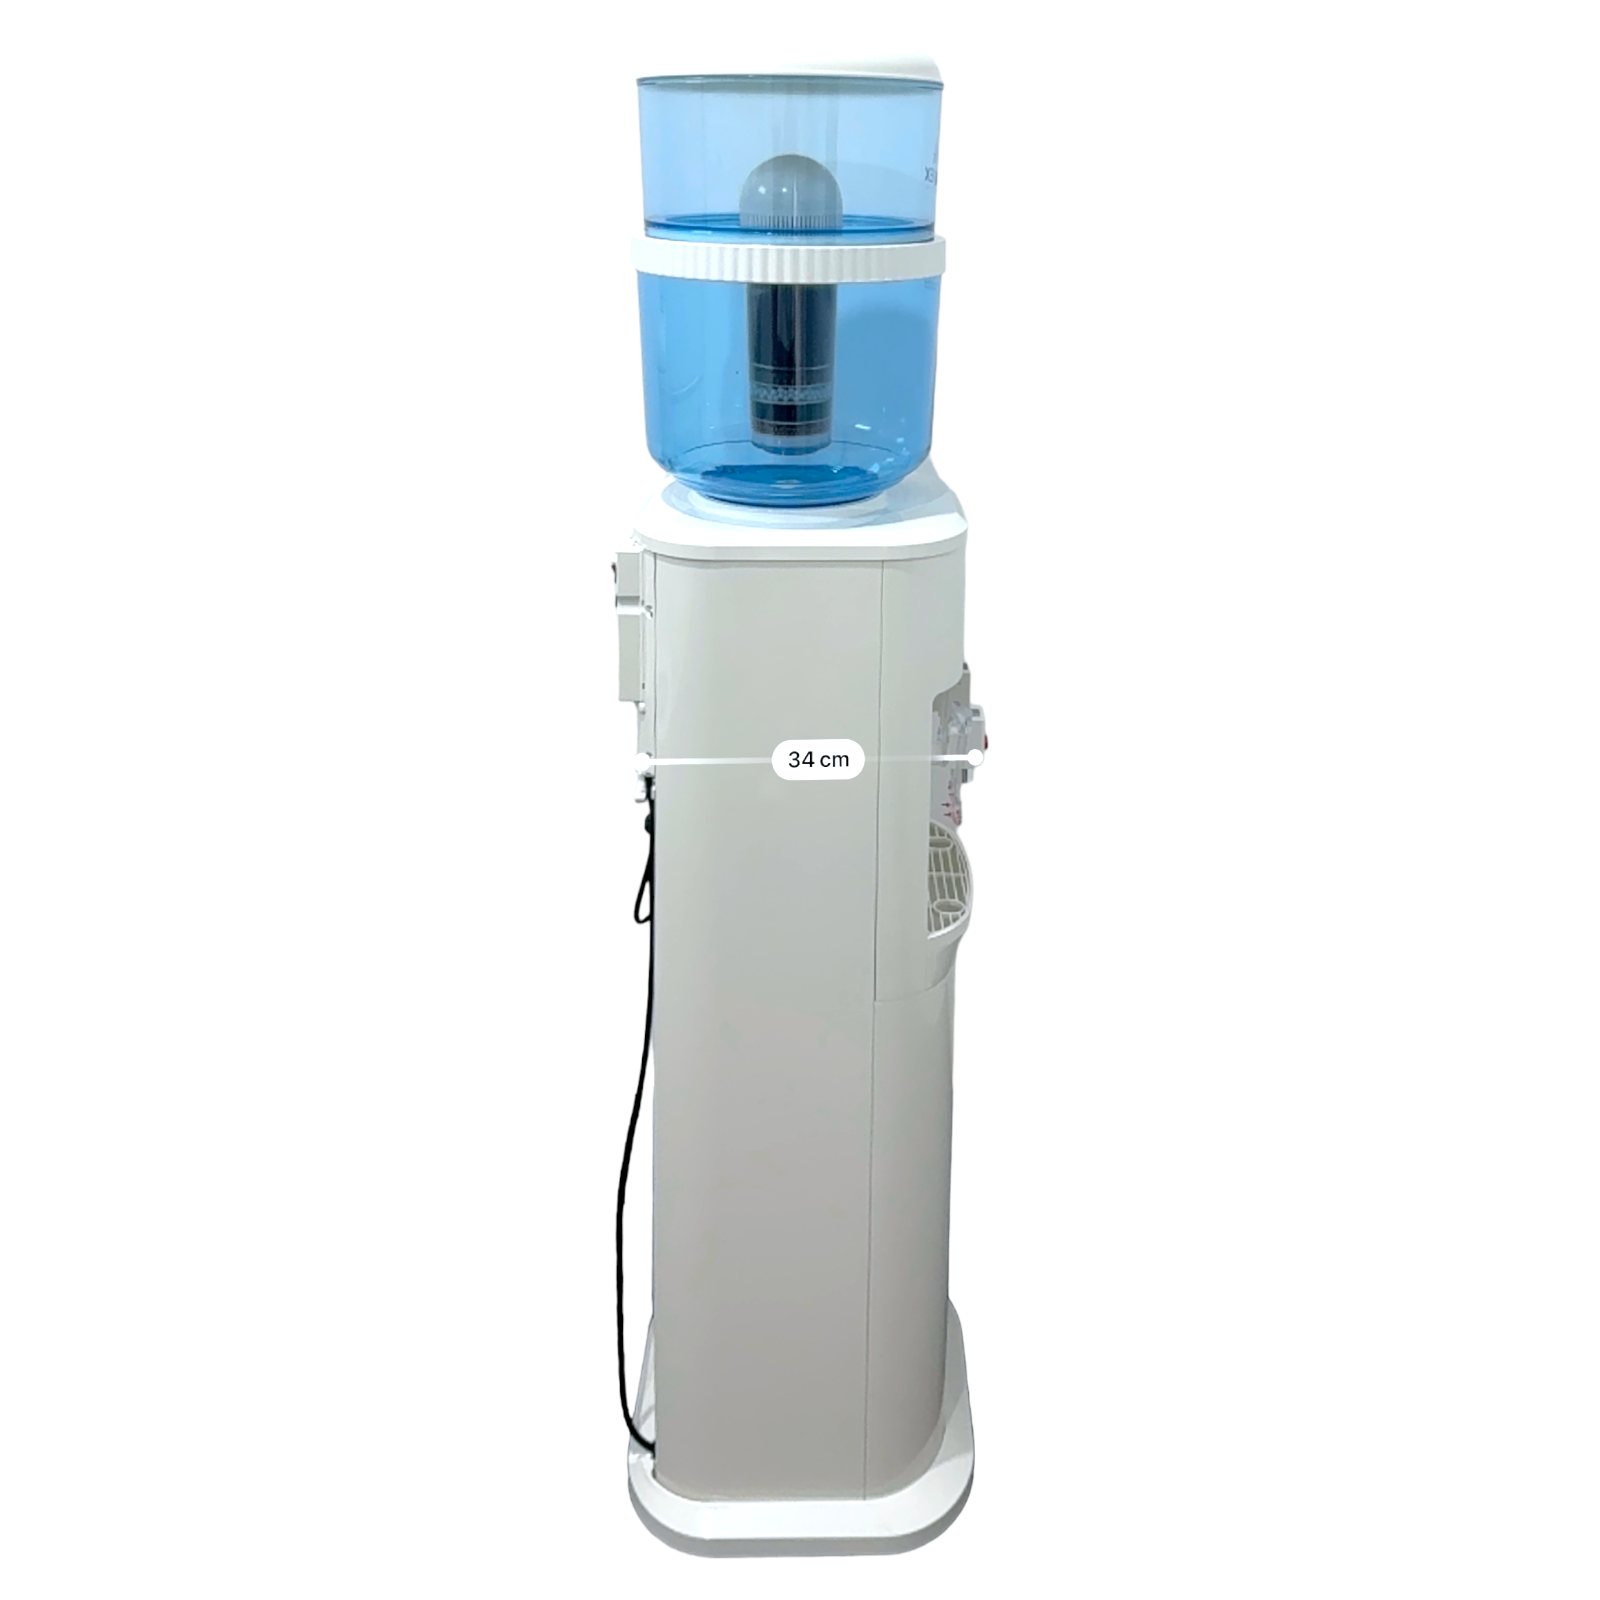 White Hot and Cold Free Standing Water Dispenser w/ Filter, LG Compressor